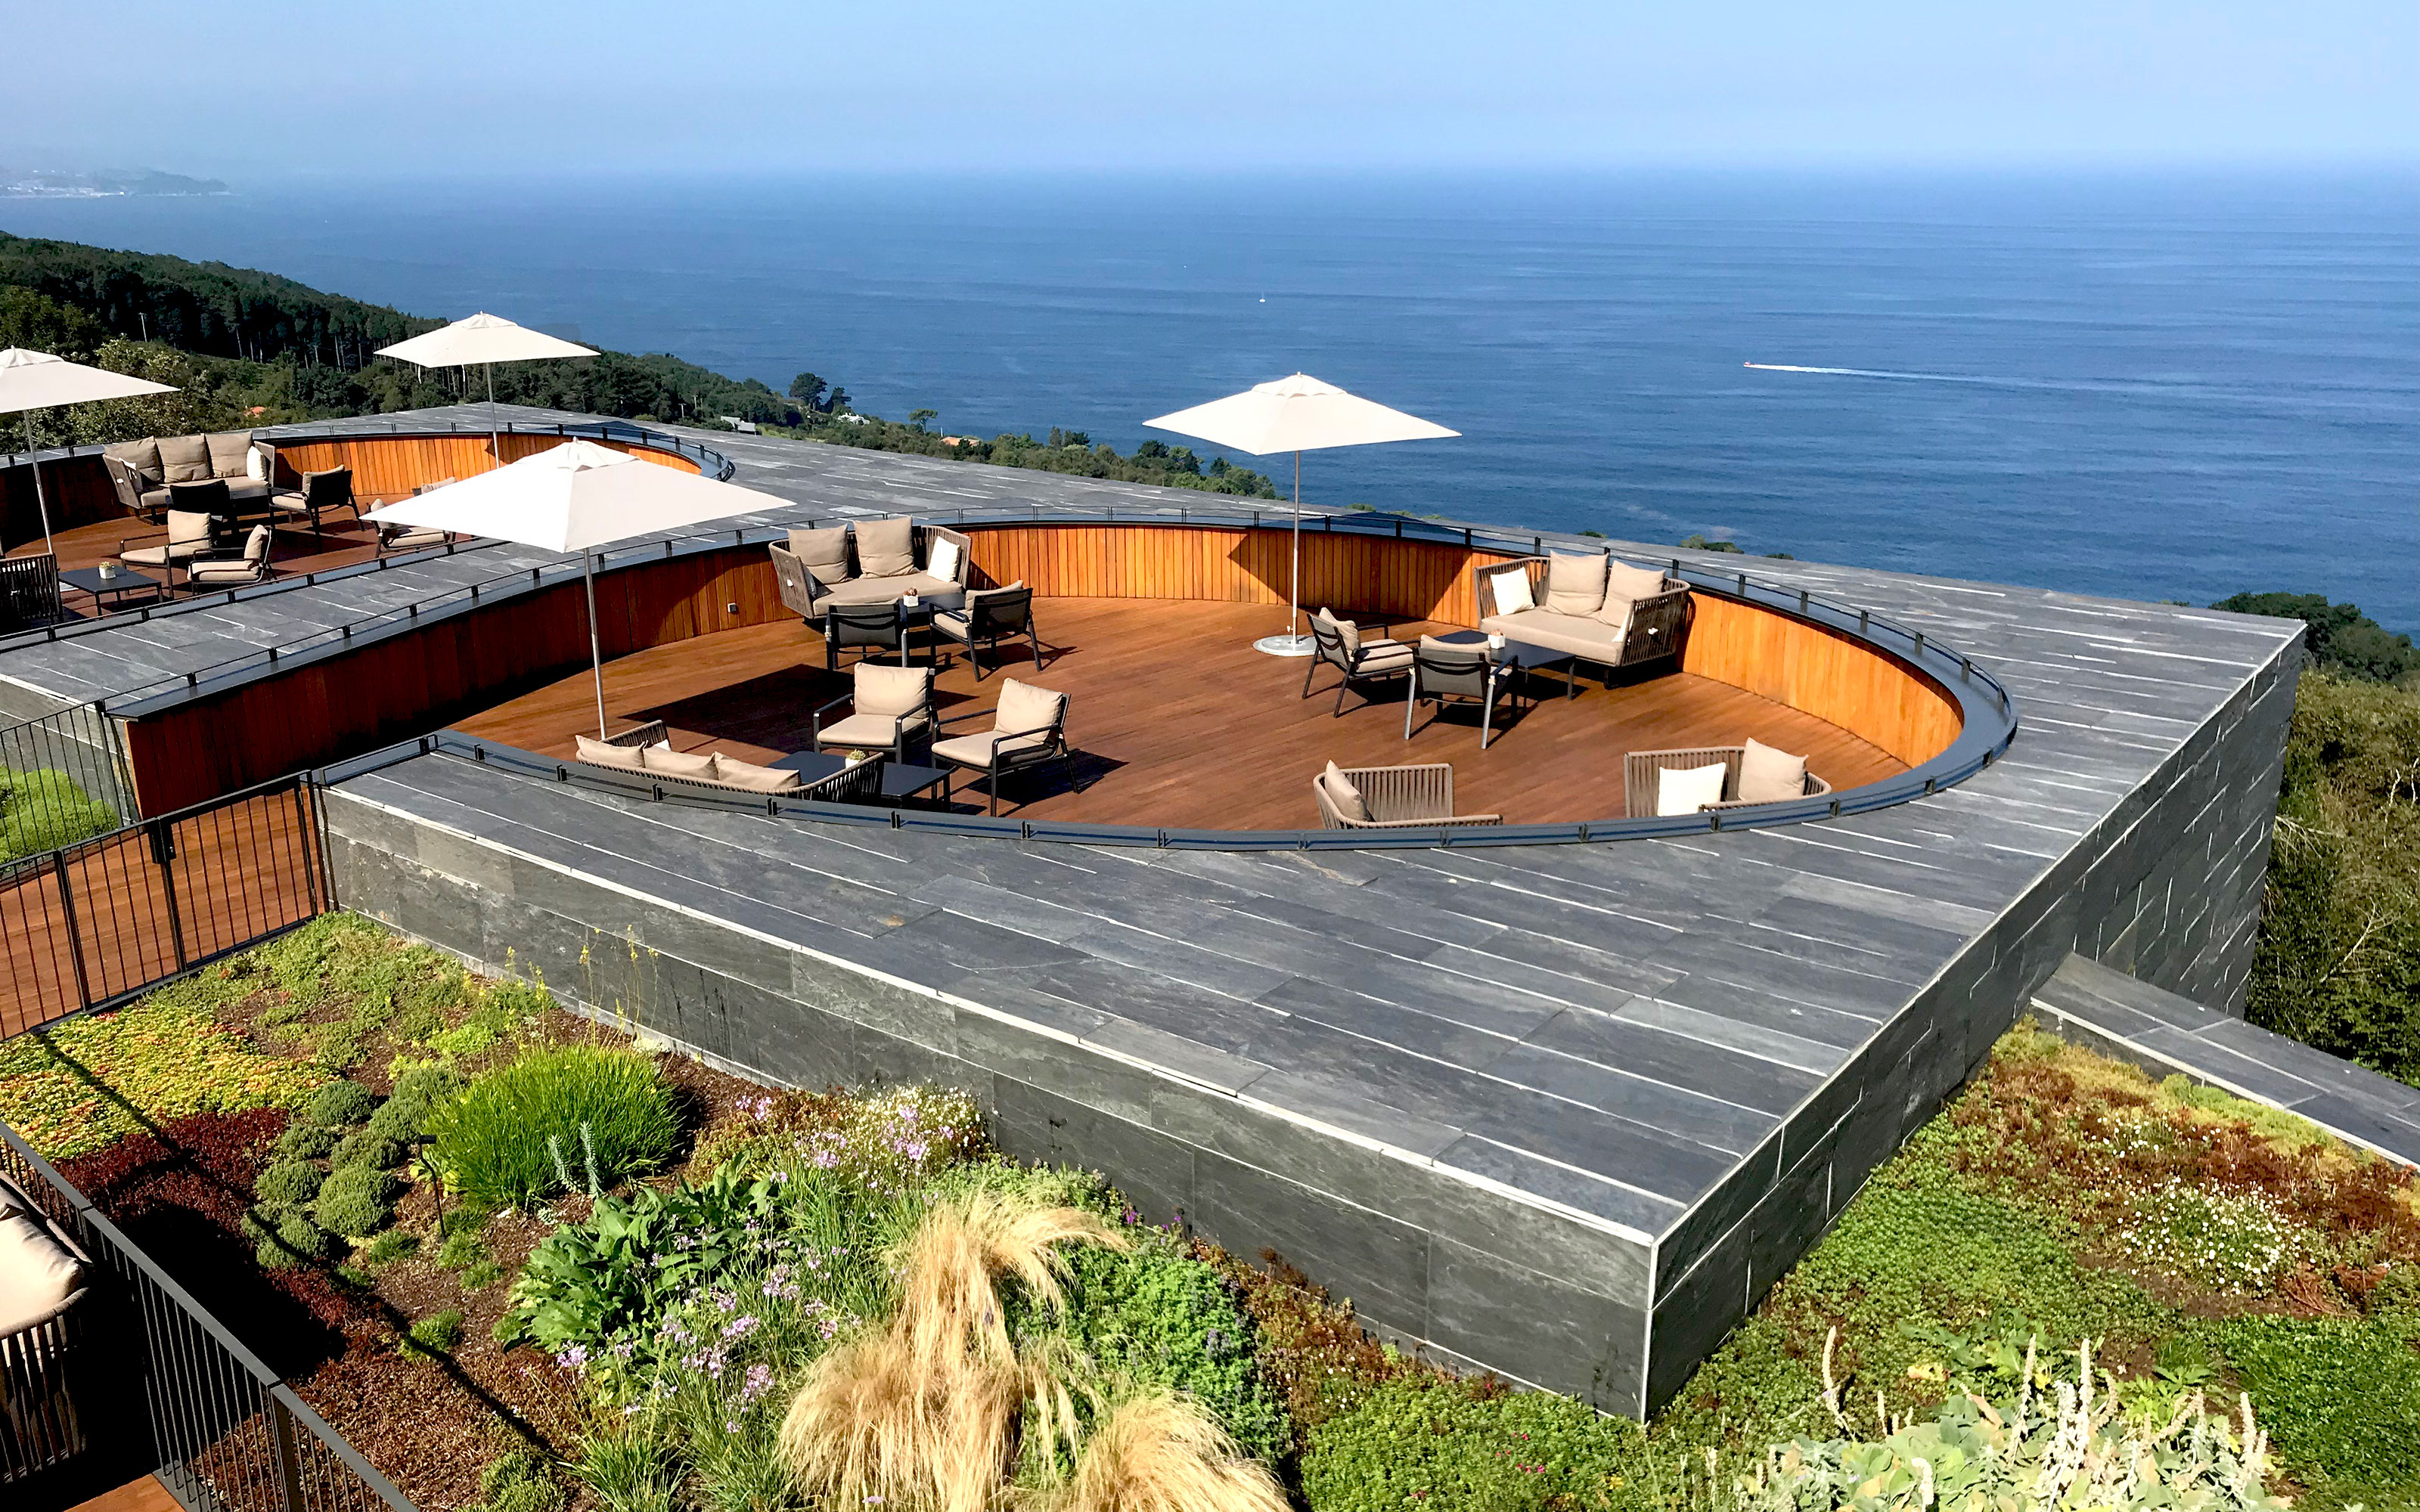 Bird's eye view onto terraces surrounded by vegetation and a view onto the ocean